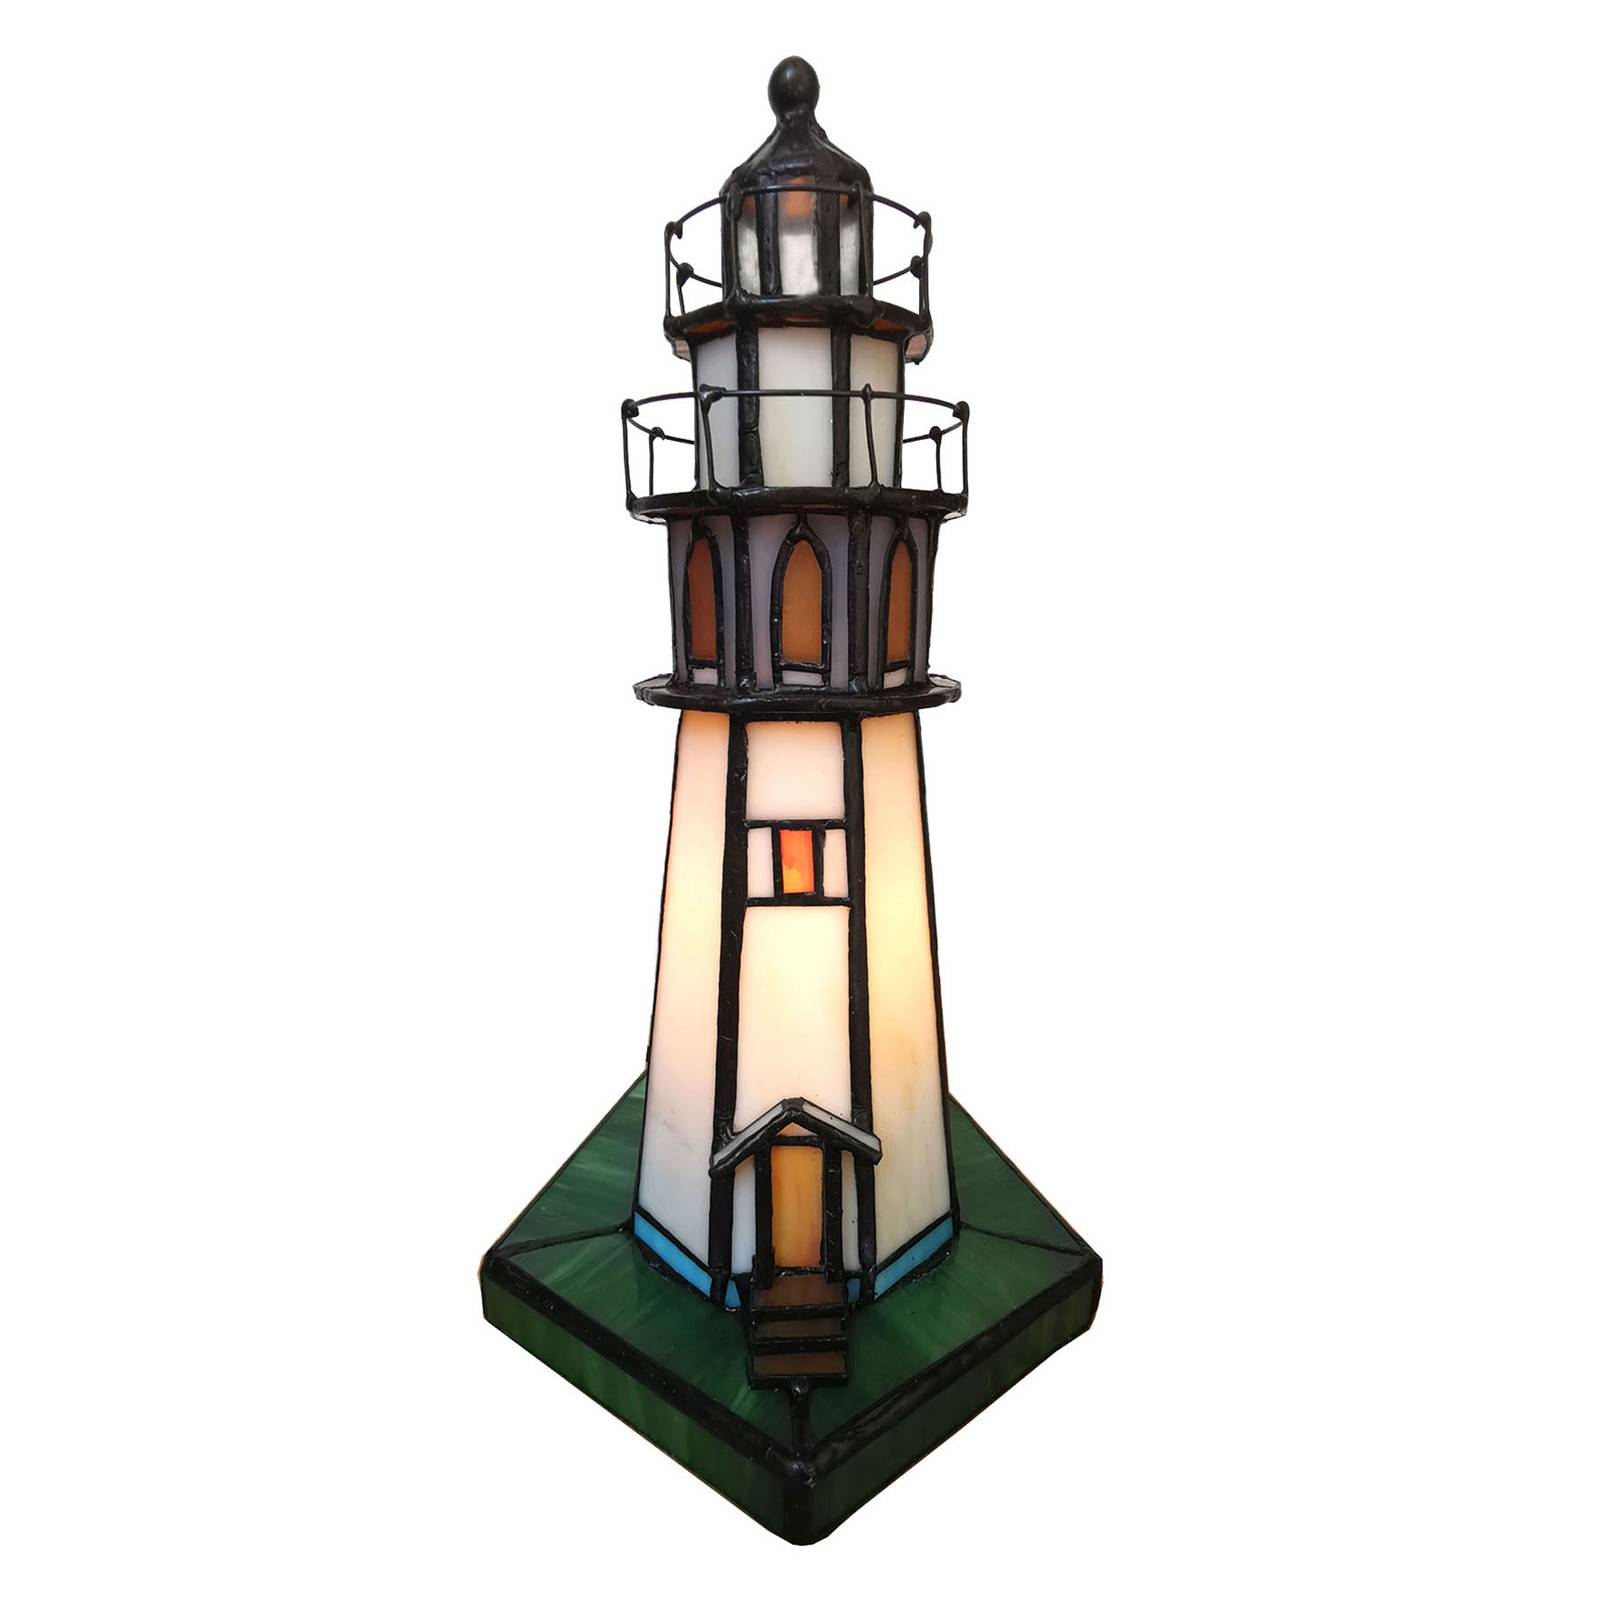 Clayre&Eef Lampe décorative 6006, phare style Tiffany